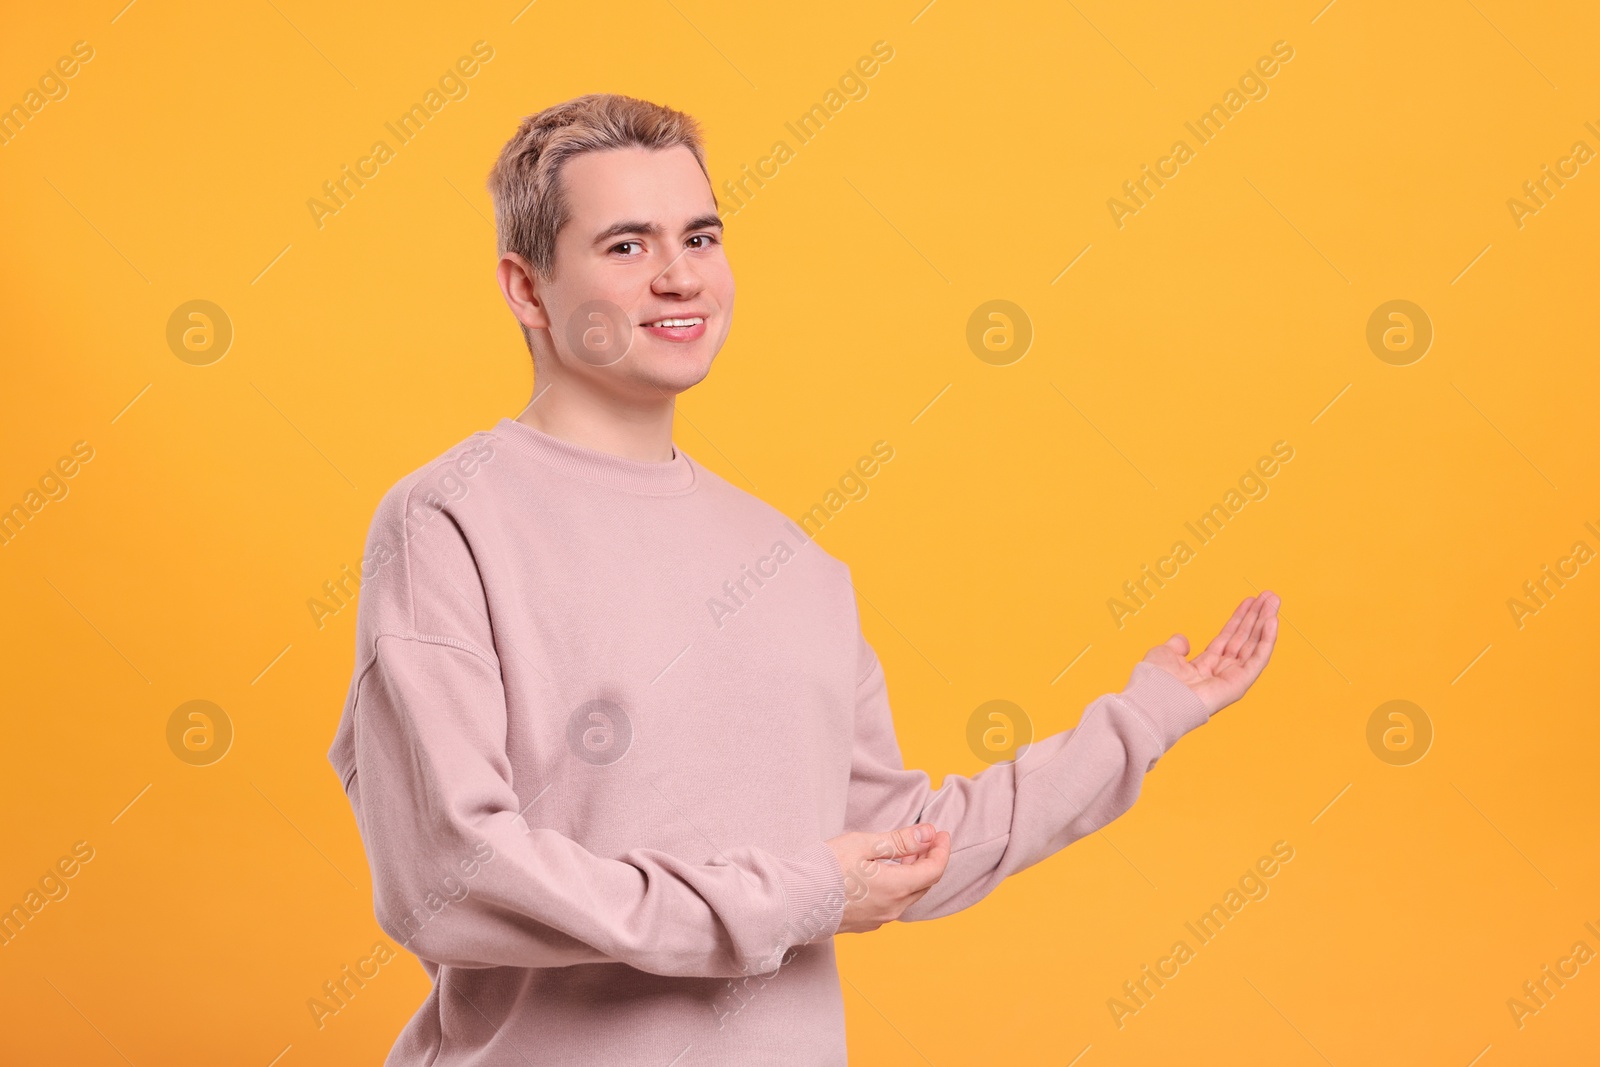 Photo of Happy man inviting to come in against orange background